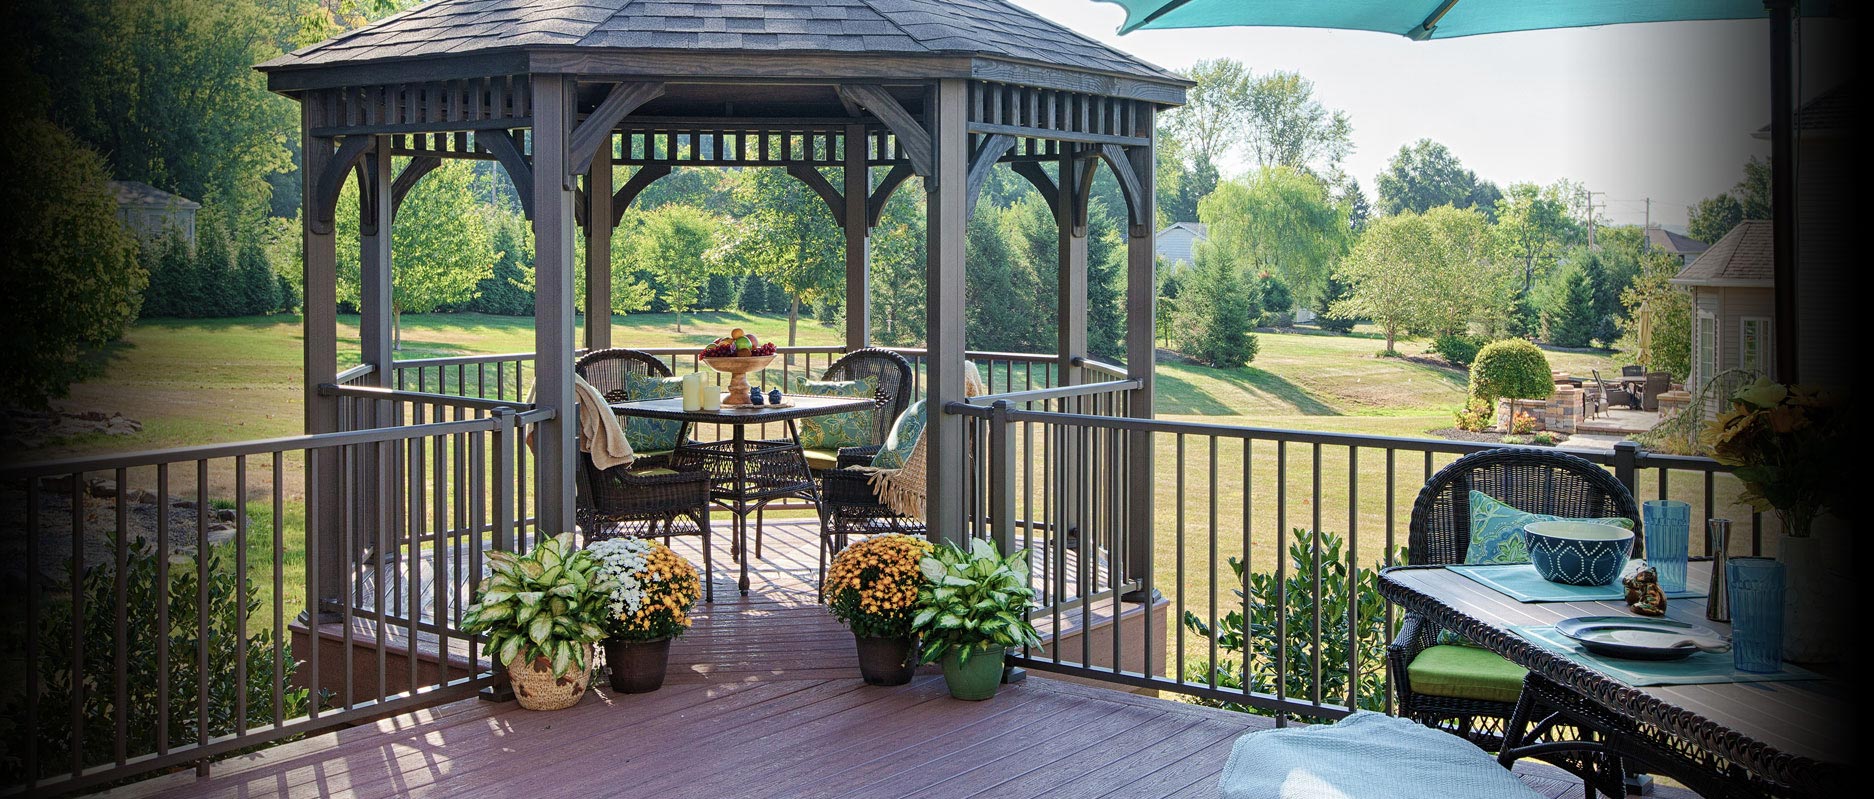 wooden octagon gazebo built as an addition to pre-existing deck